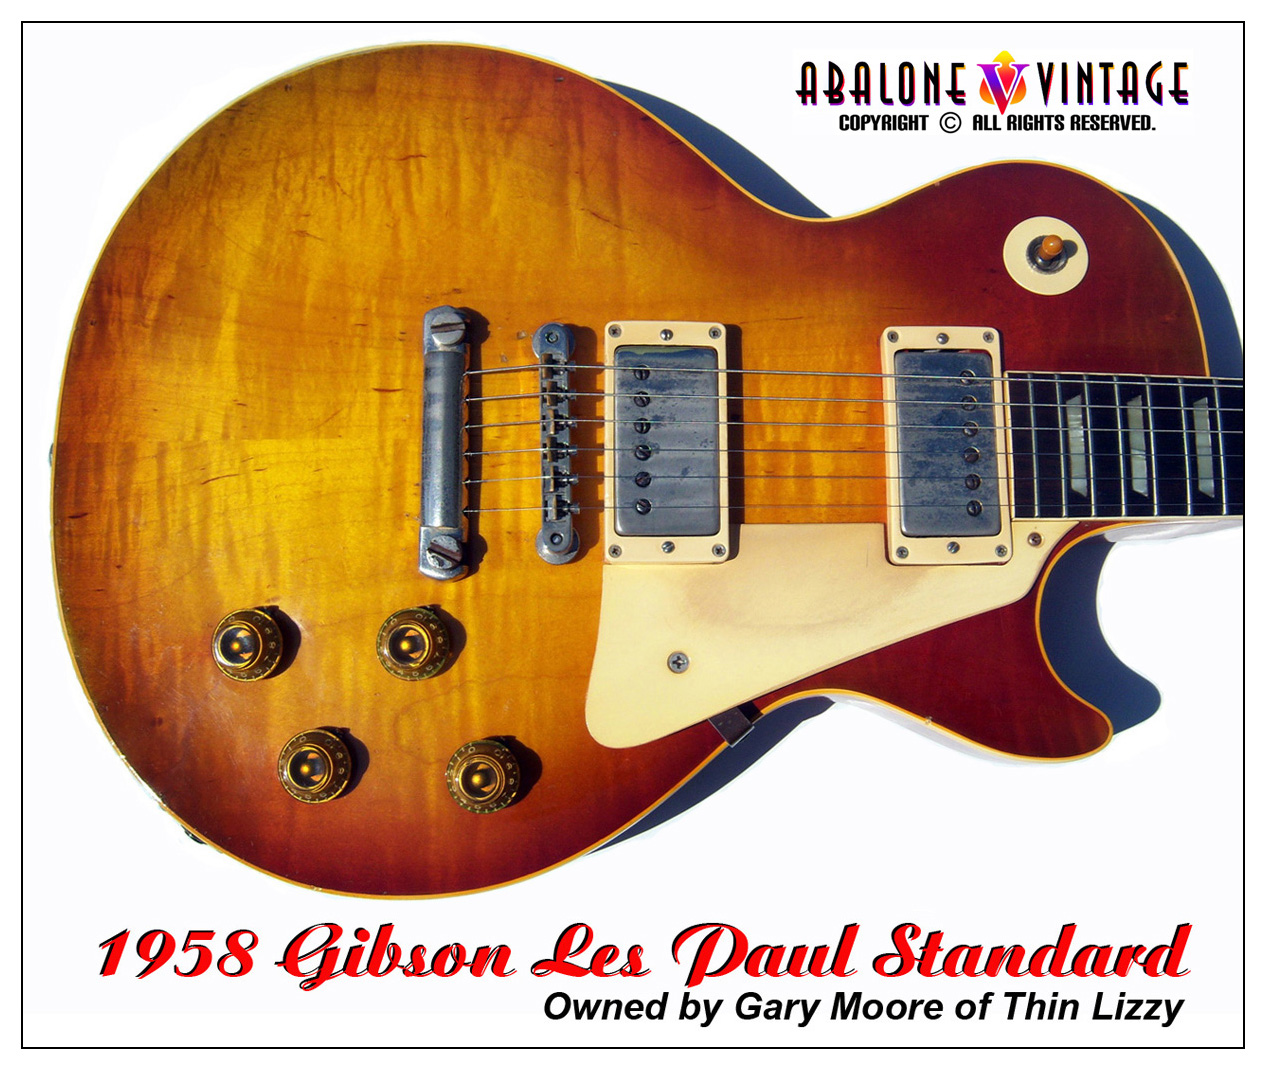 1958 Gibson Les Paul Standard guitar owned by Gary Moore of Thin Lizzy.